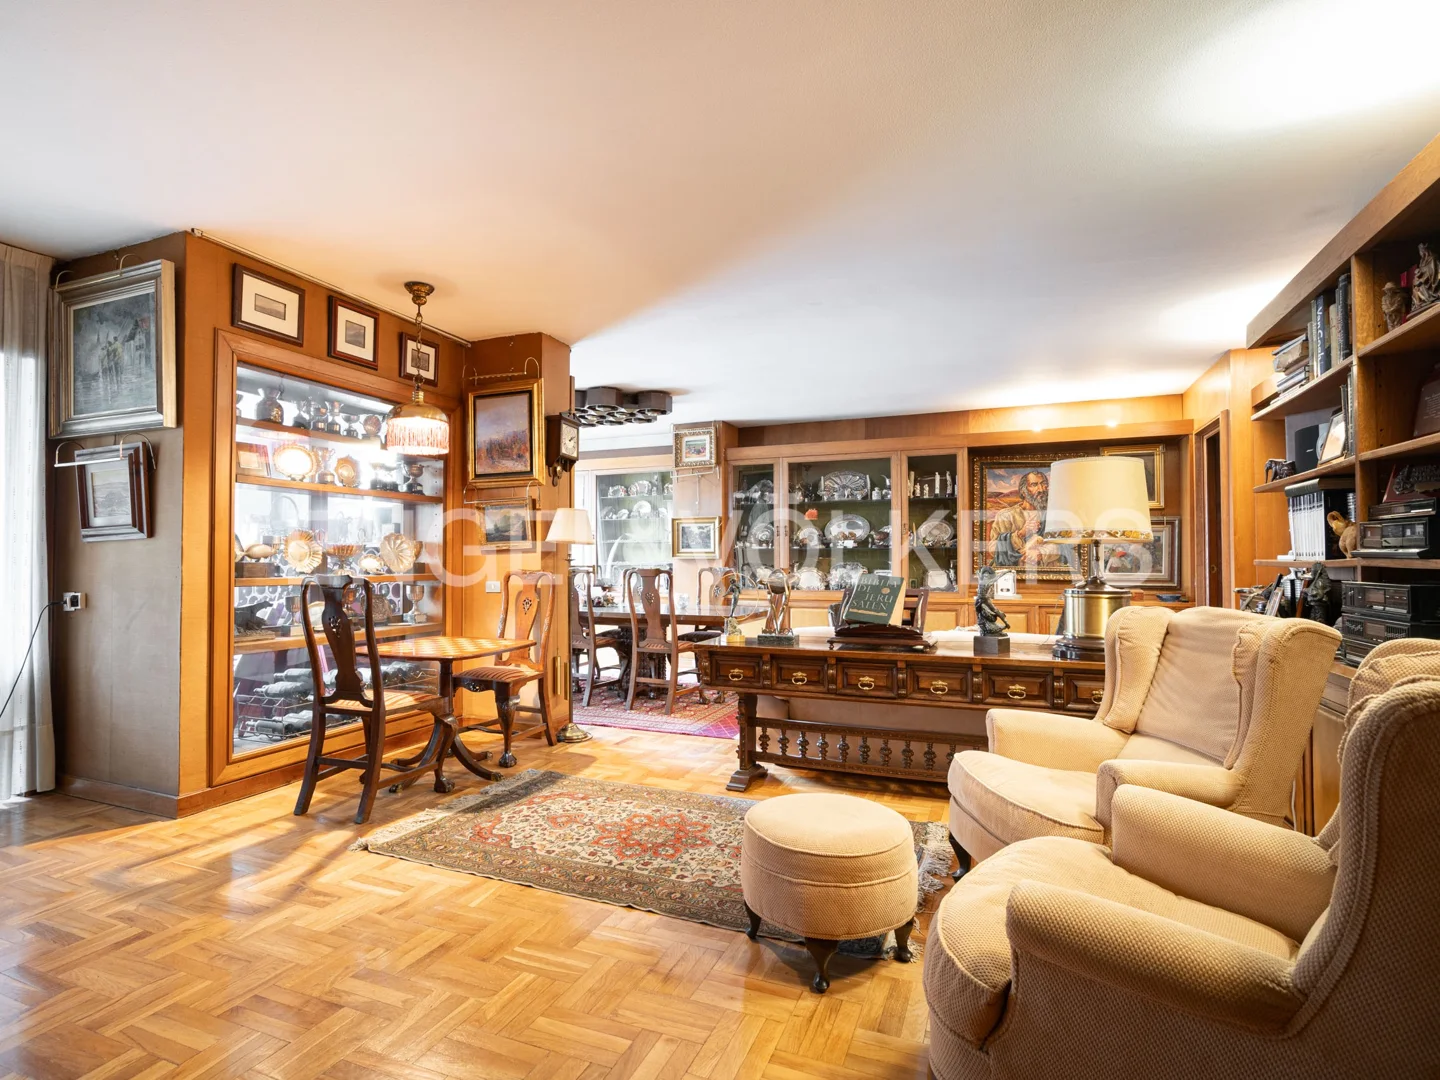 Spacious and stately home in the centre of Oviedo